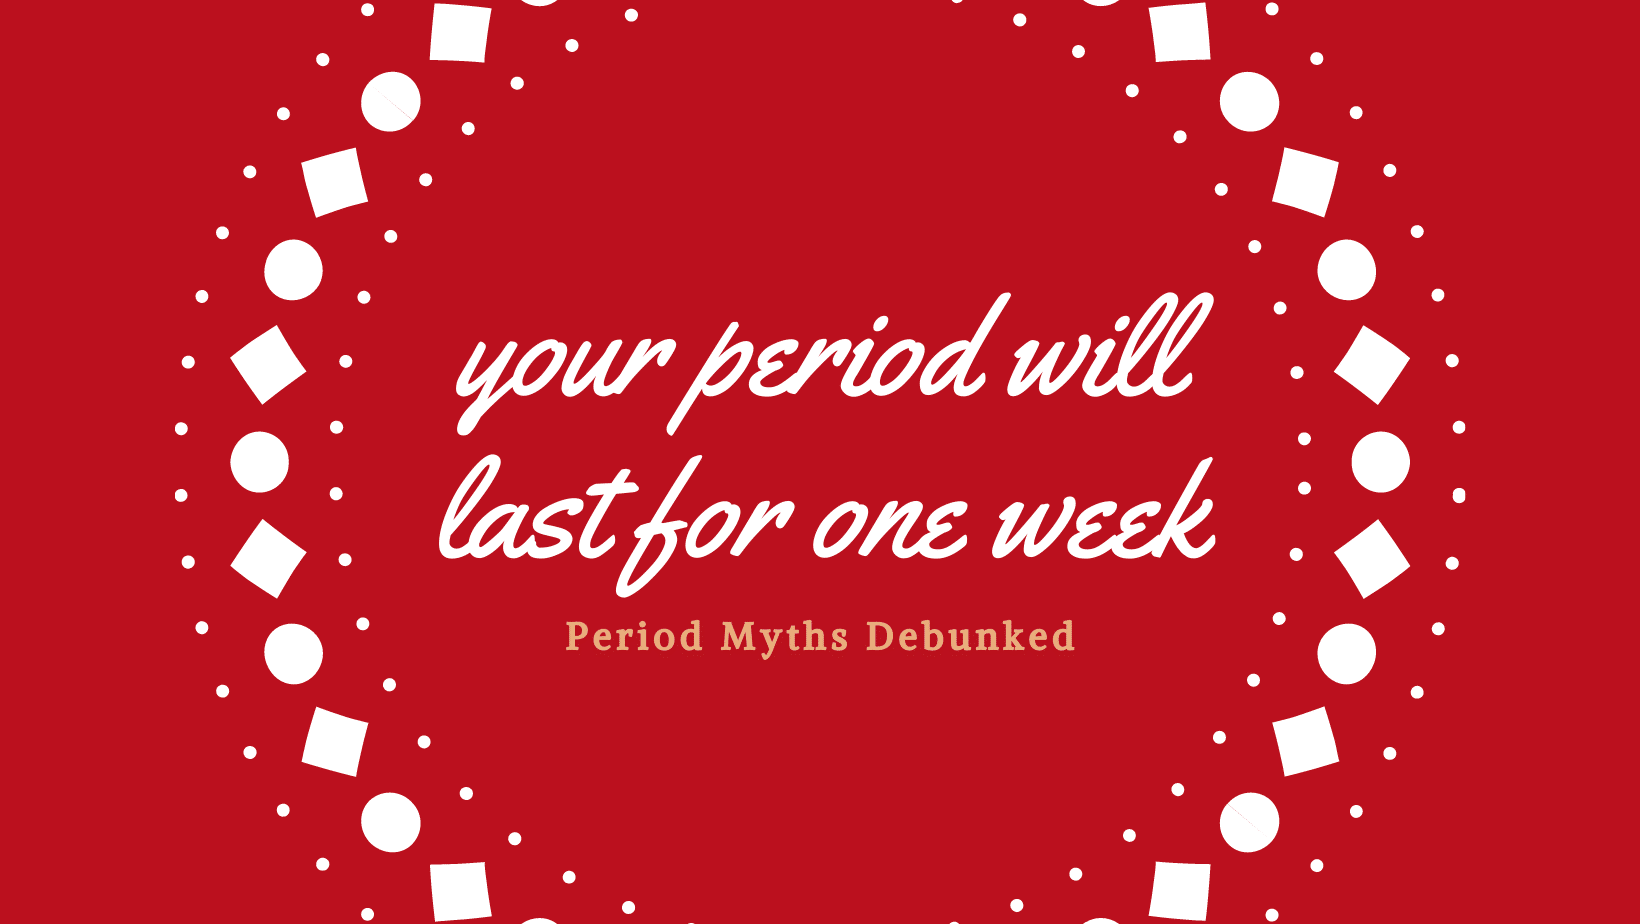 Graphic about debunking period myths that your period will last for one week.